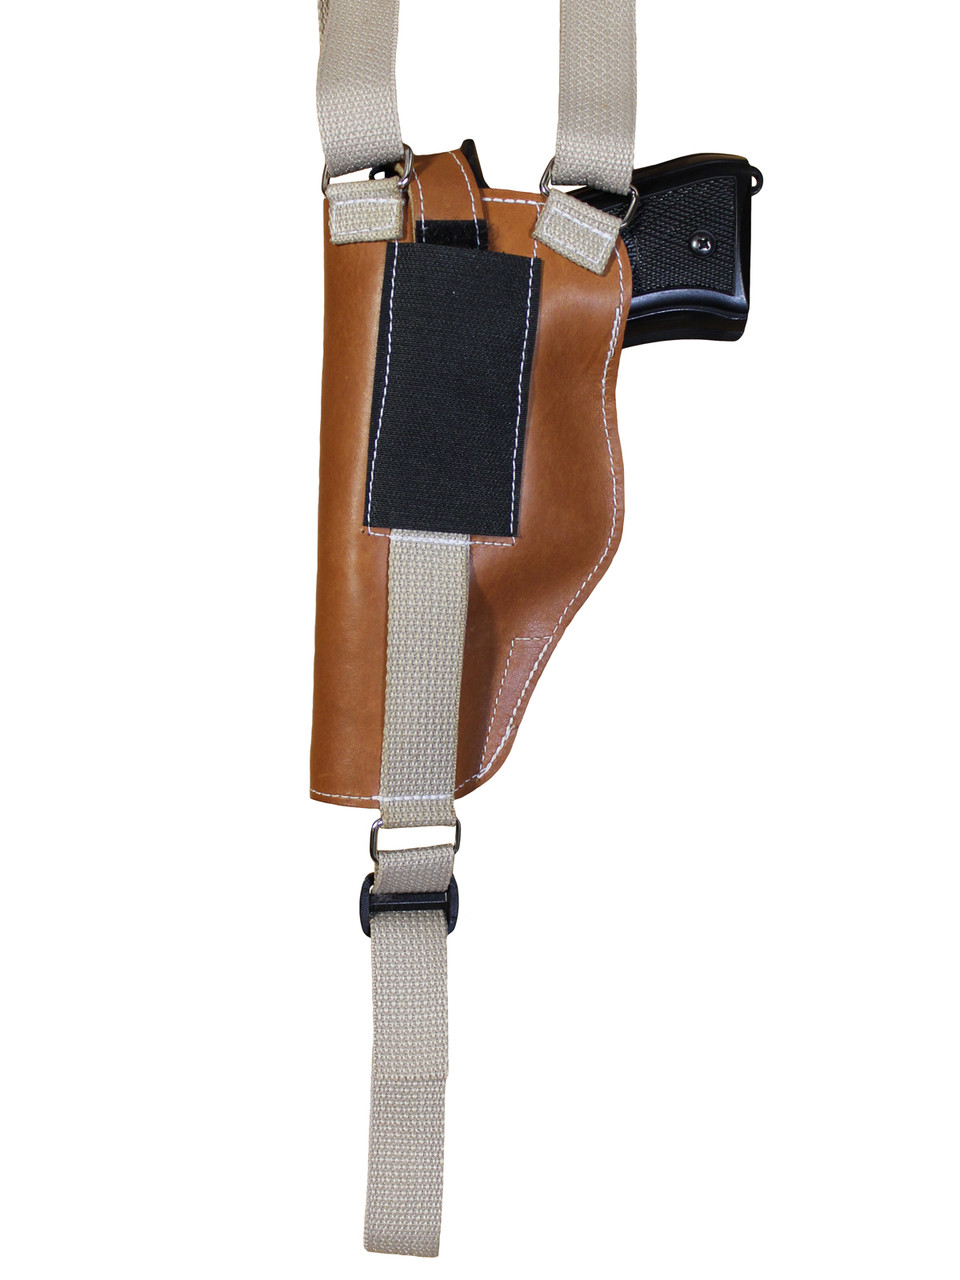 Saddle Mate Leather Universal Gun Holster and Holder, Brown 